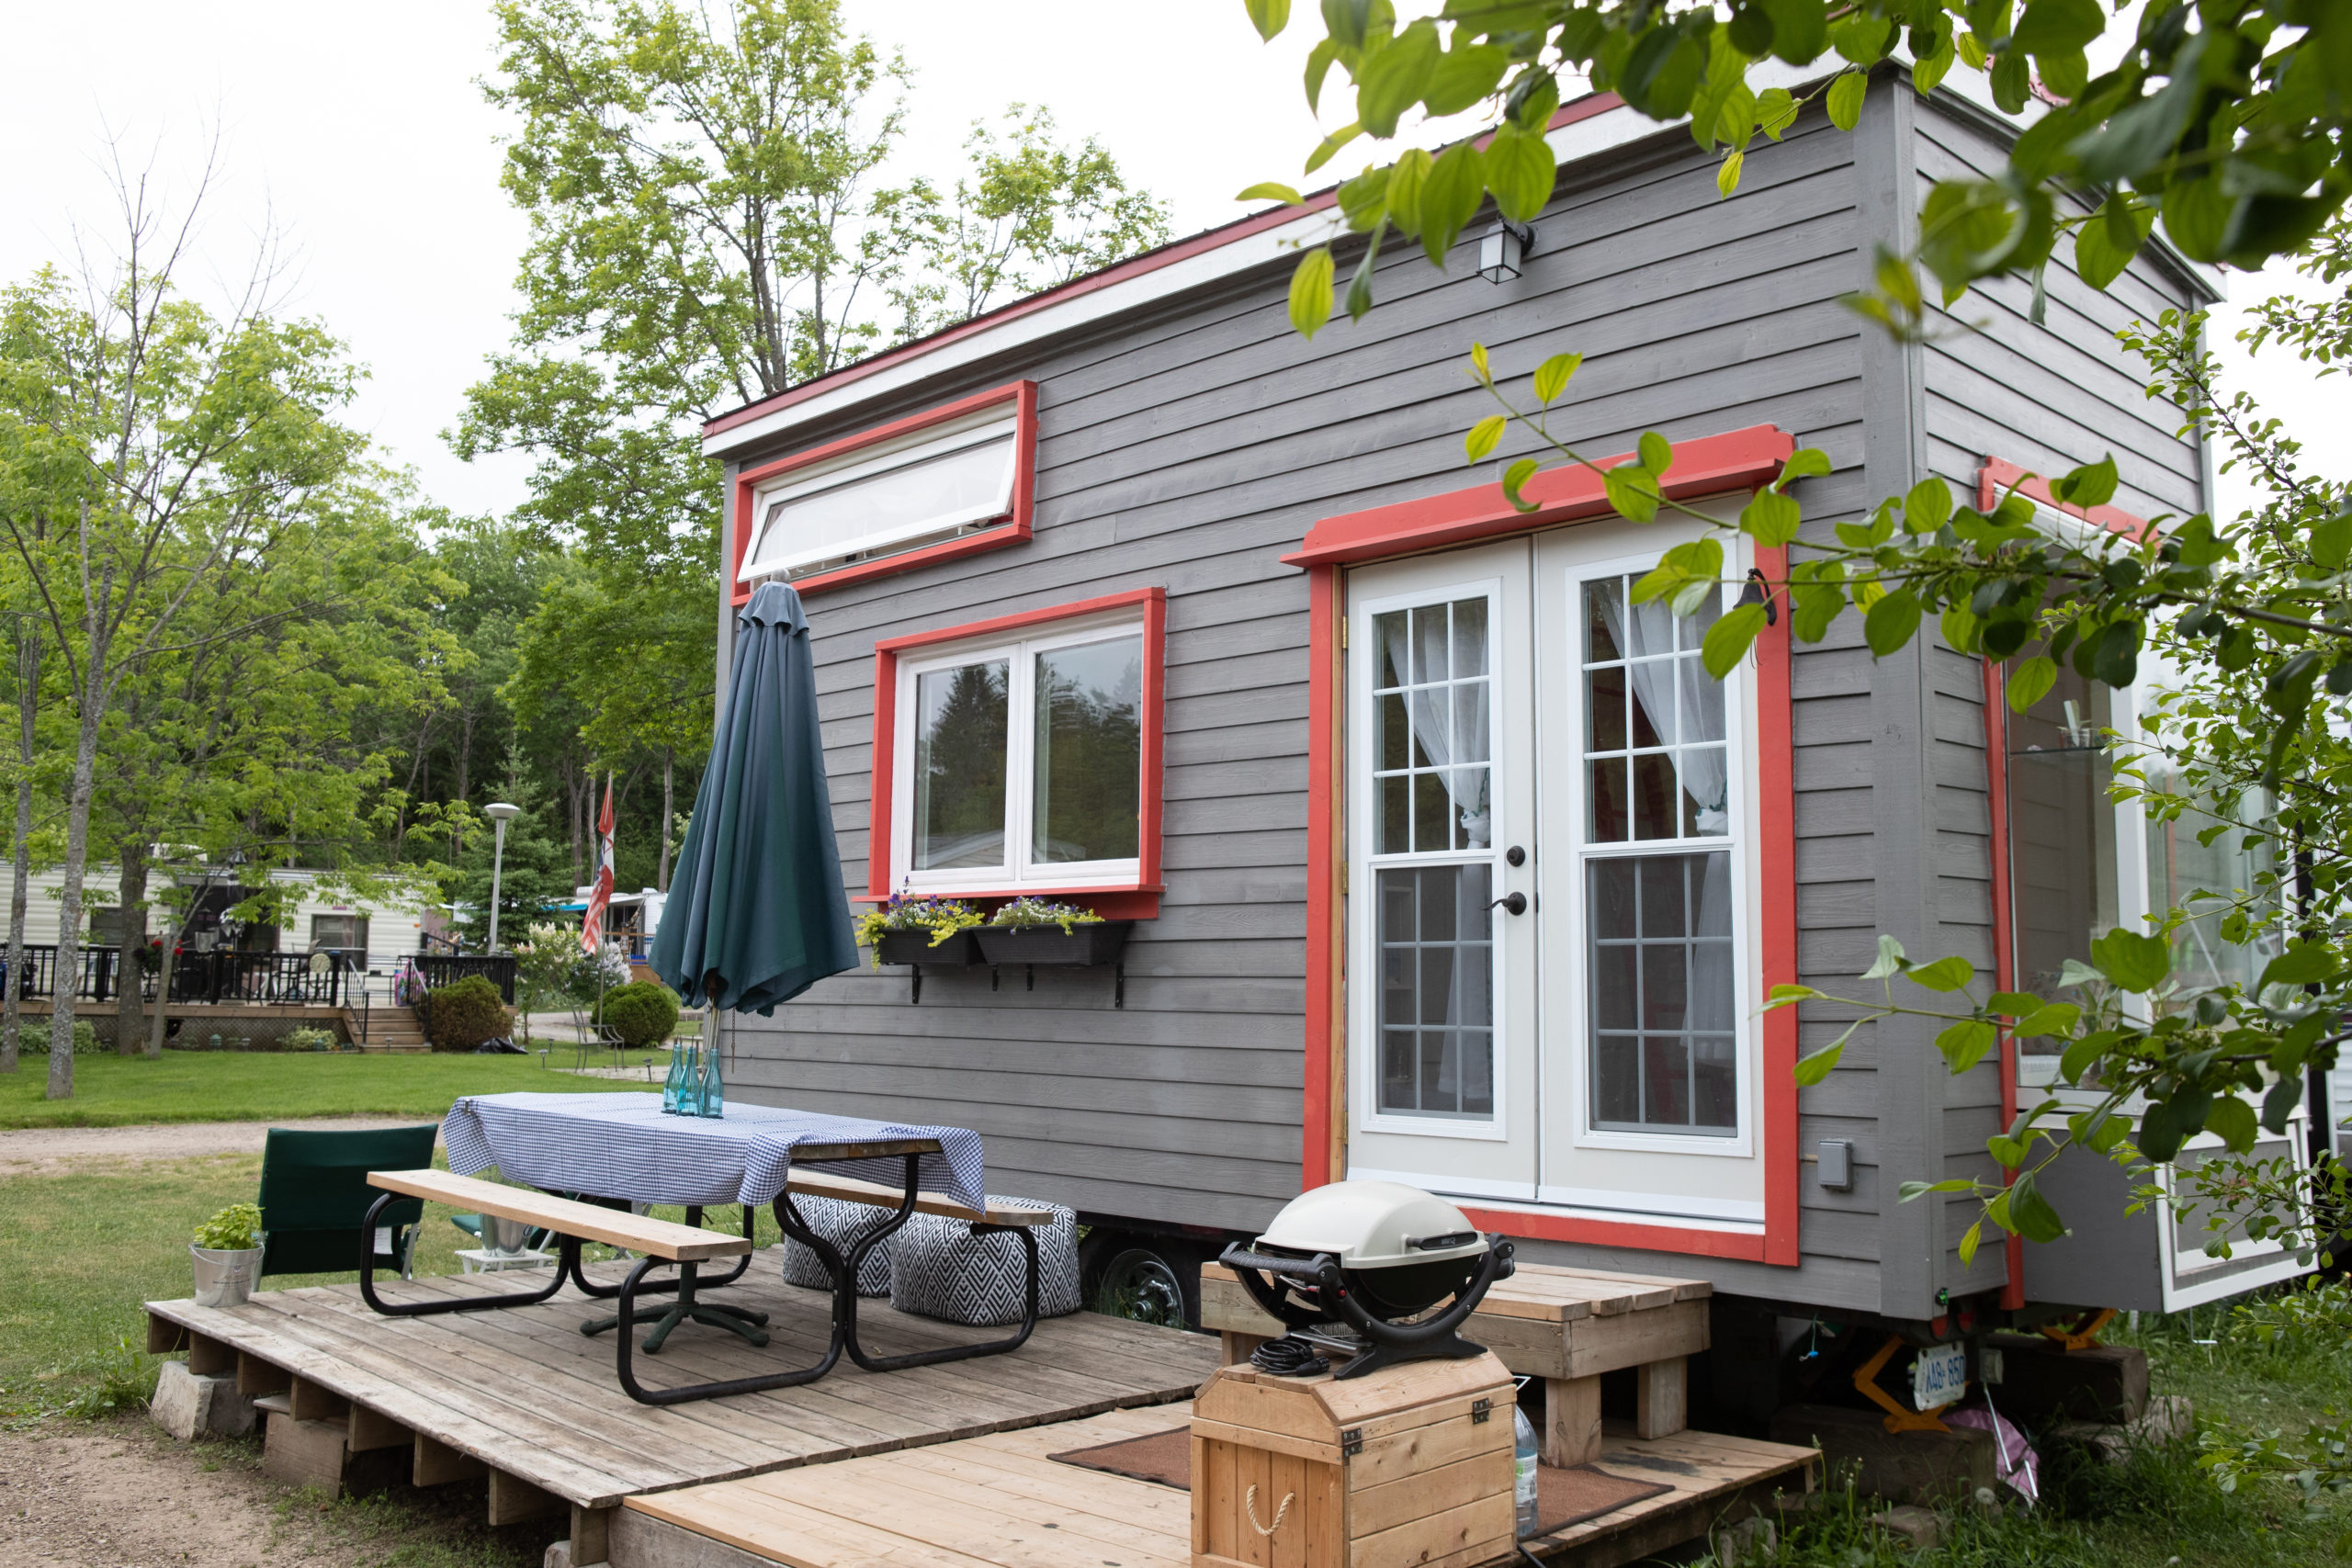 Funky girl shows off her DIY Tiny Home